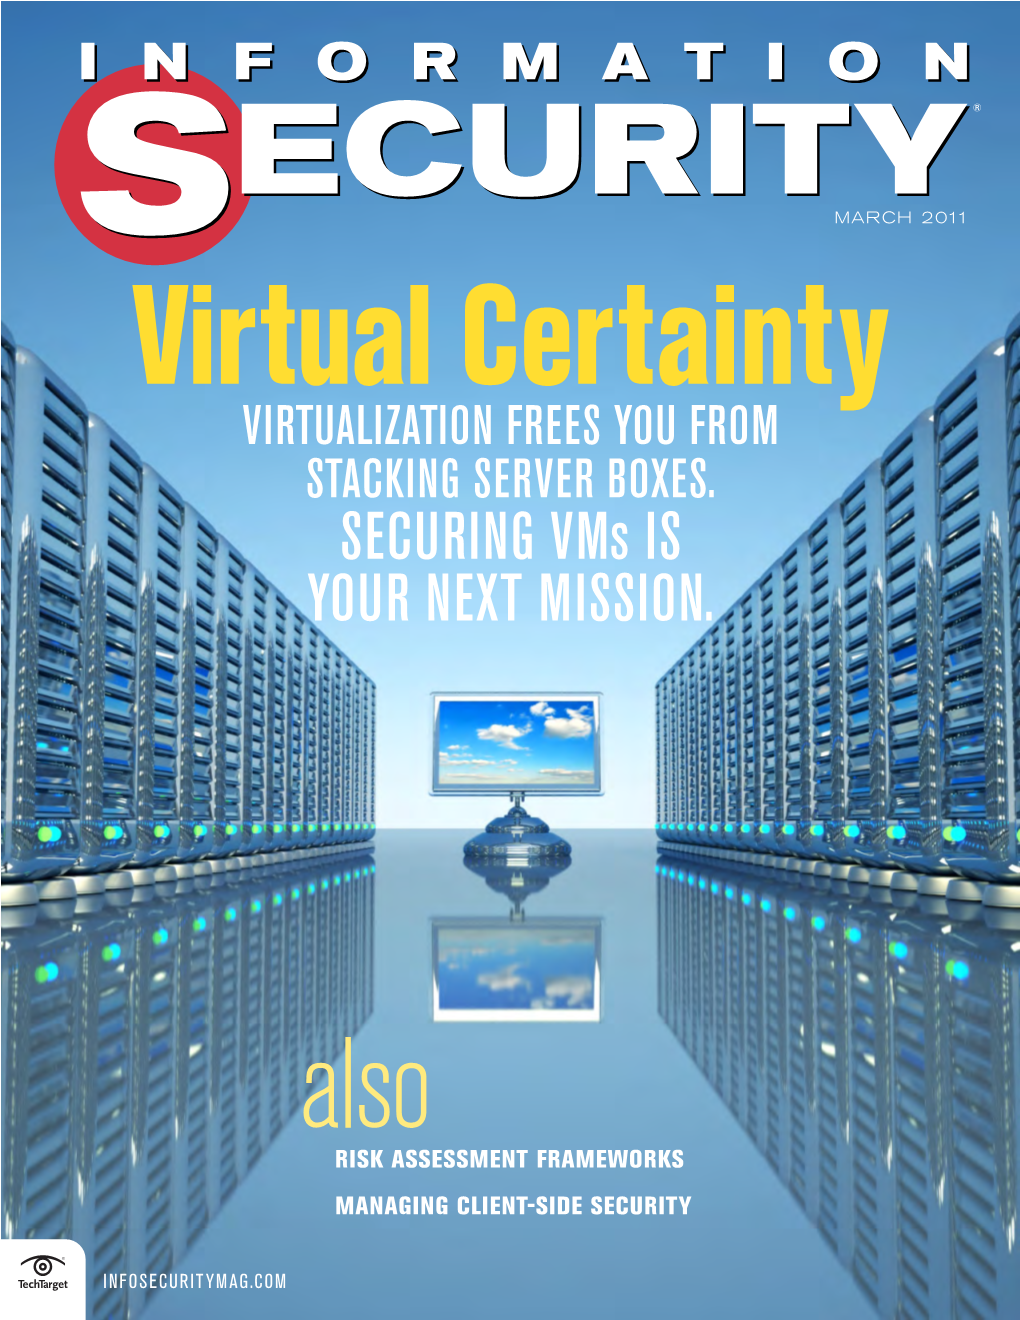 SECURING Vms IS YOUR NEXT MISSION